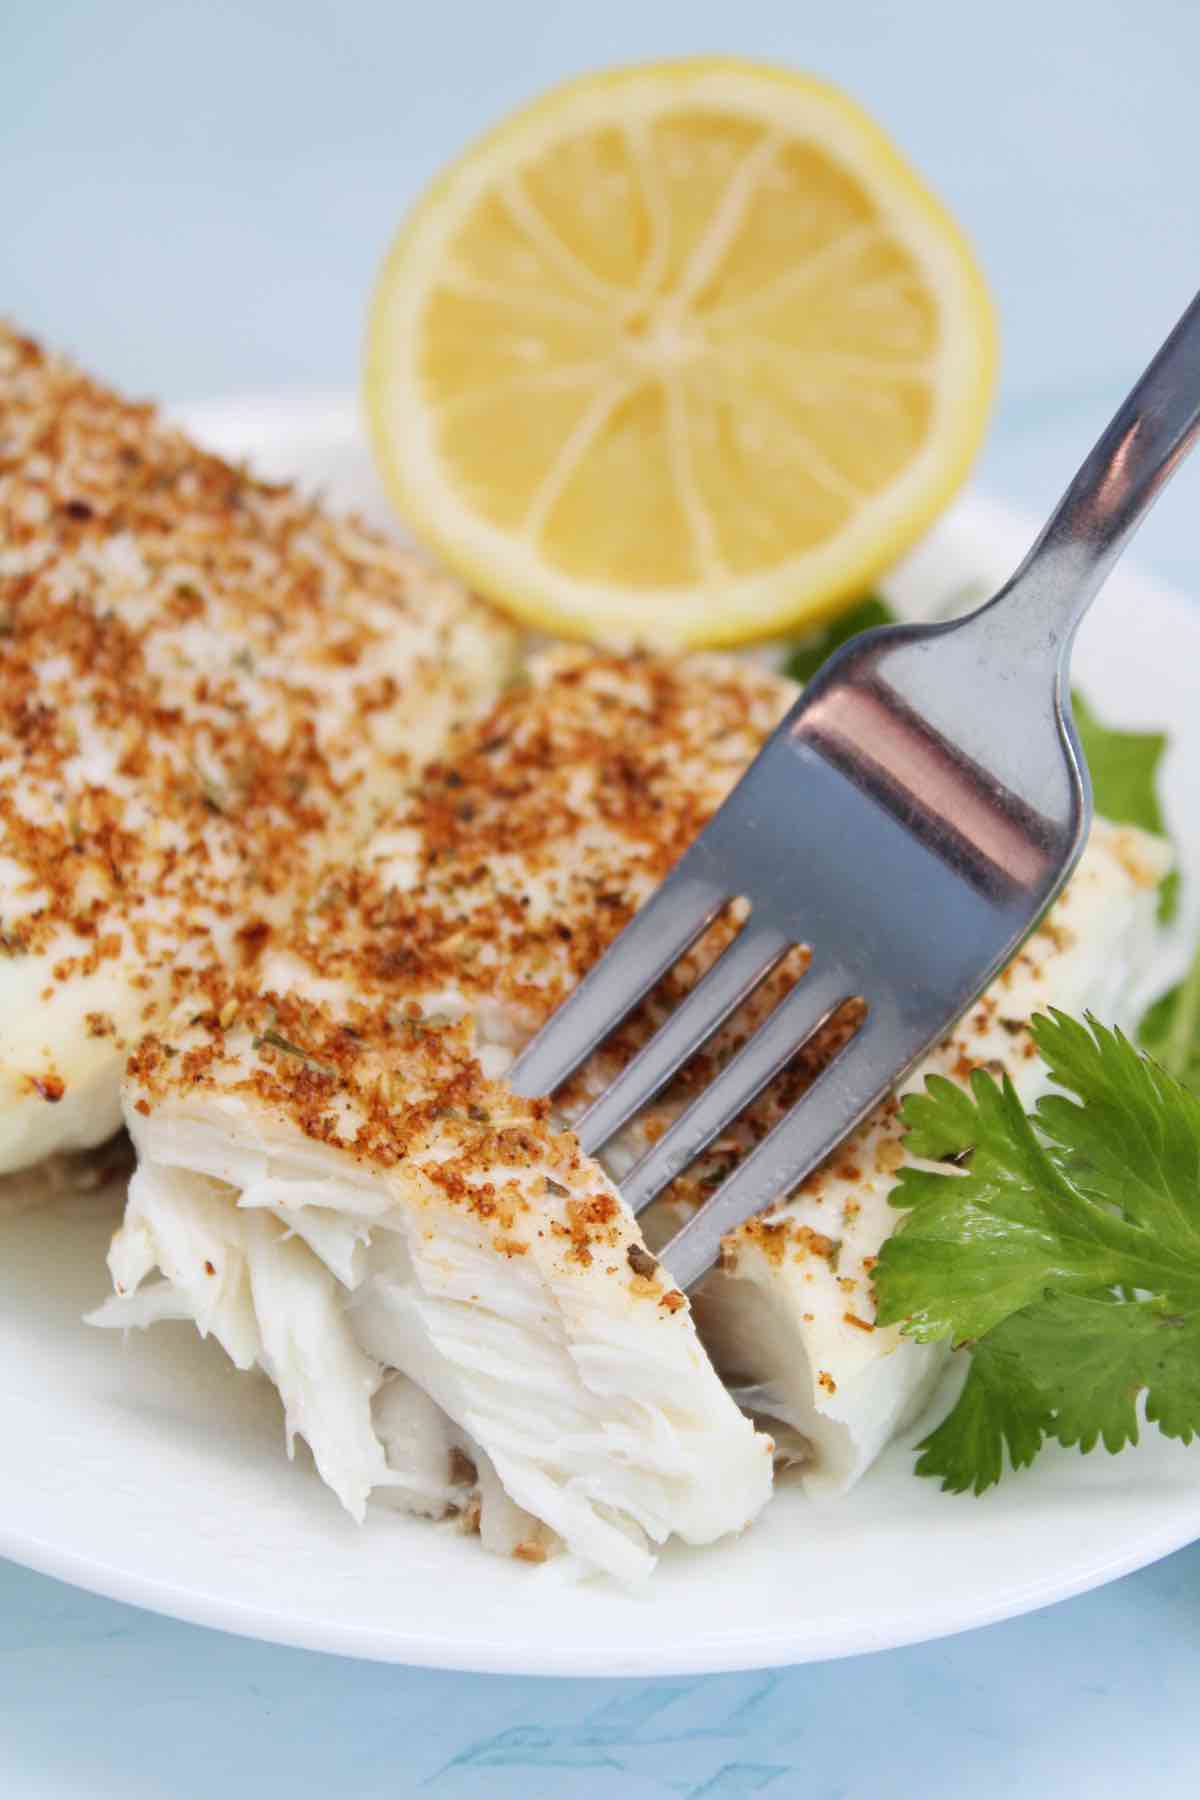 This healthy halibut recipe is made with no breading and is low carb and keto friendly.